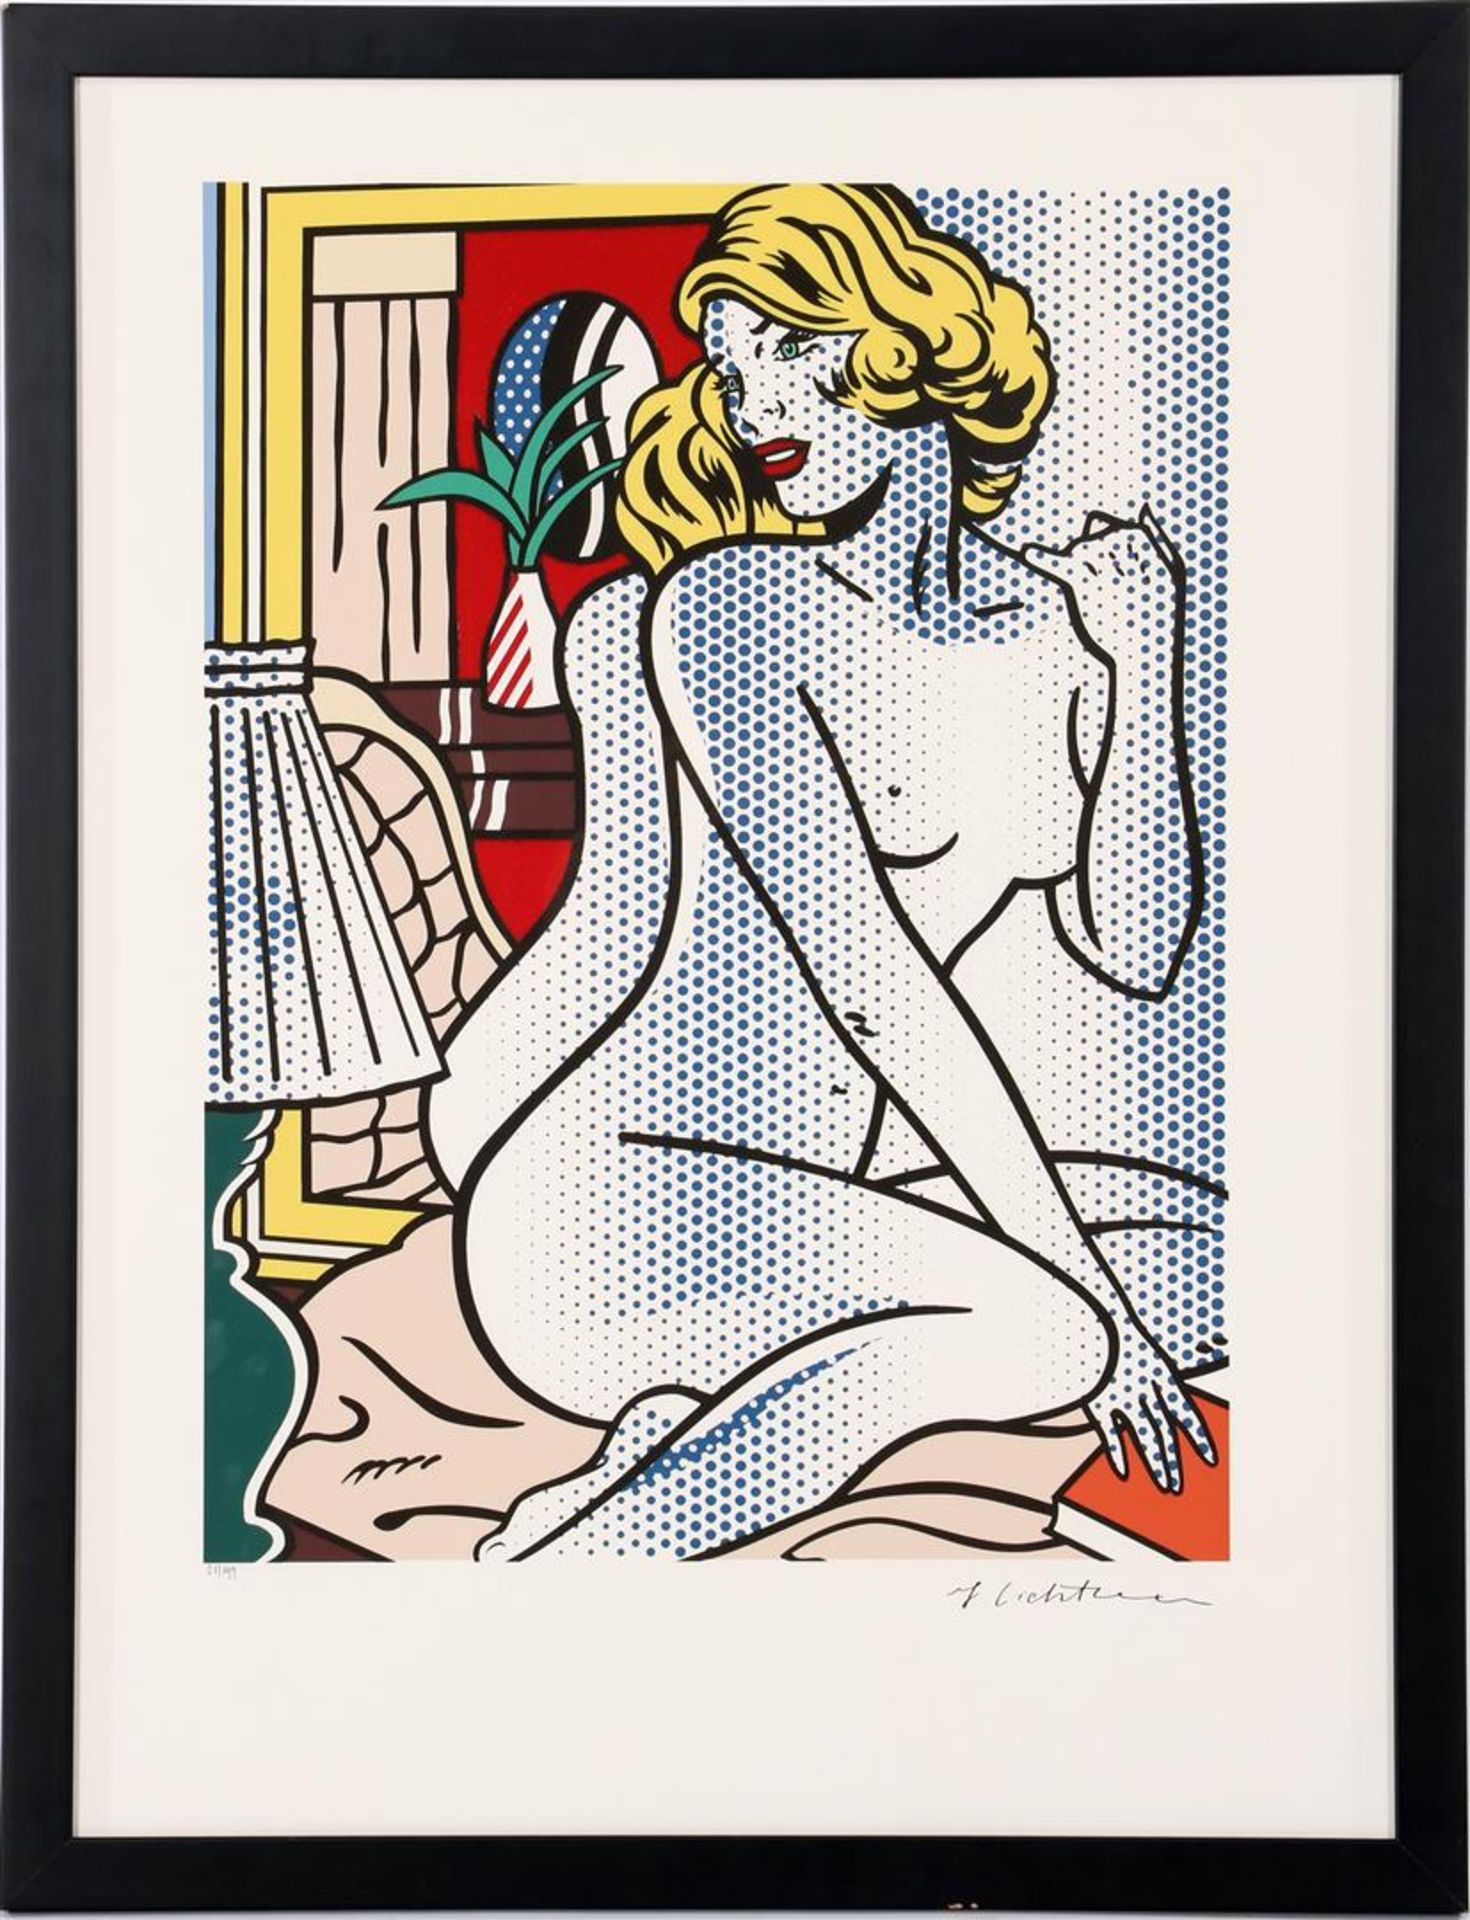 Signed J Lichtenstein, Composition with posing naked lady